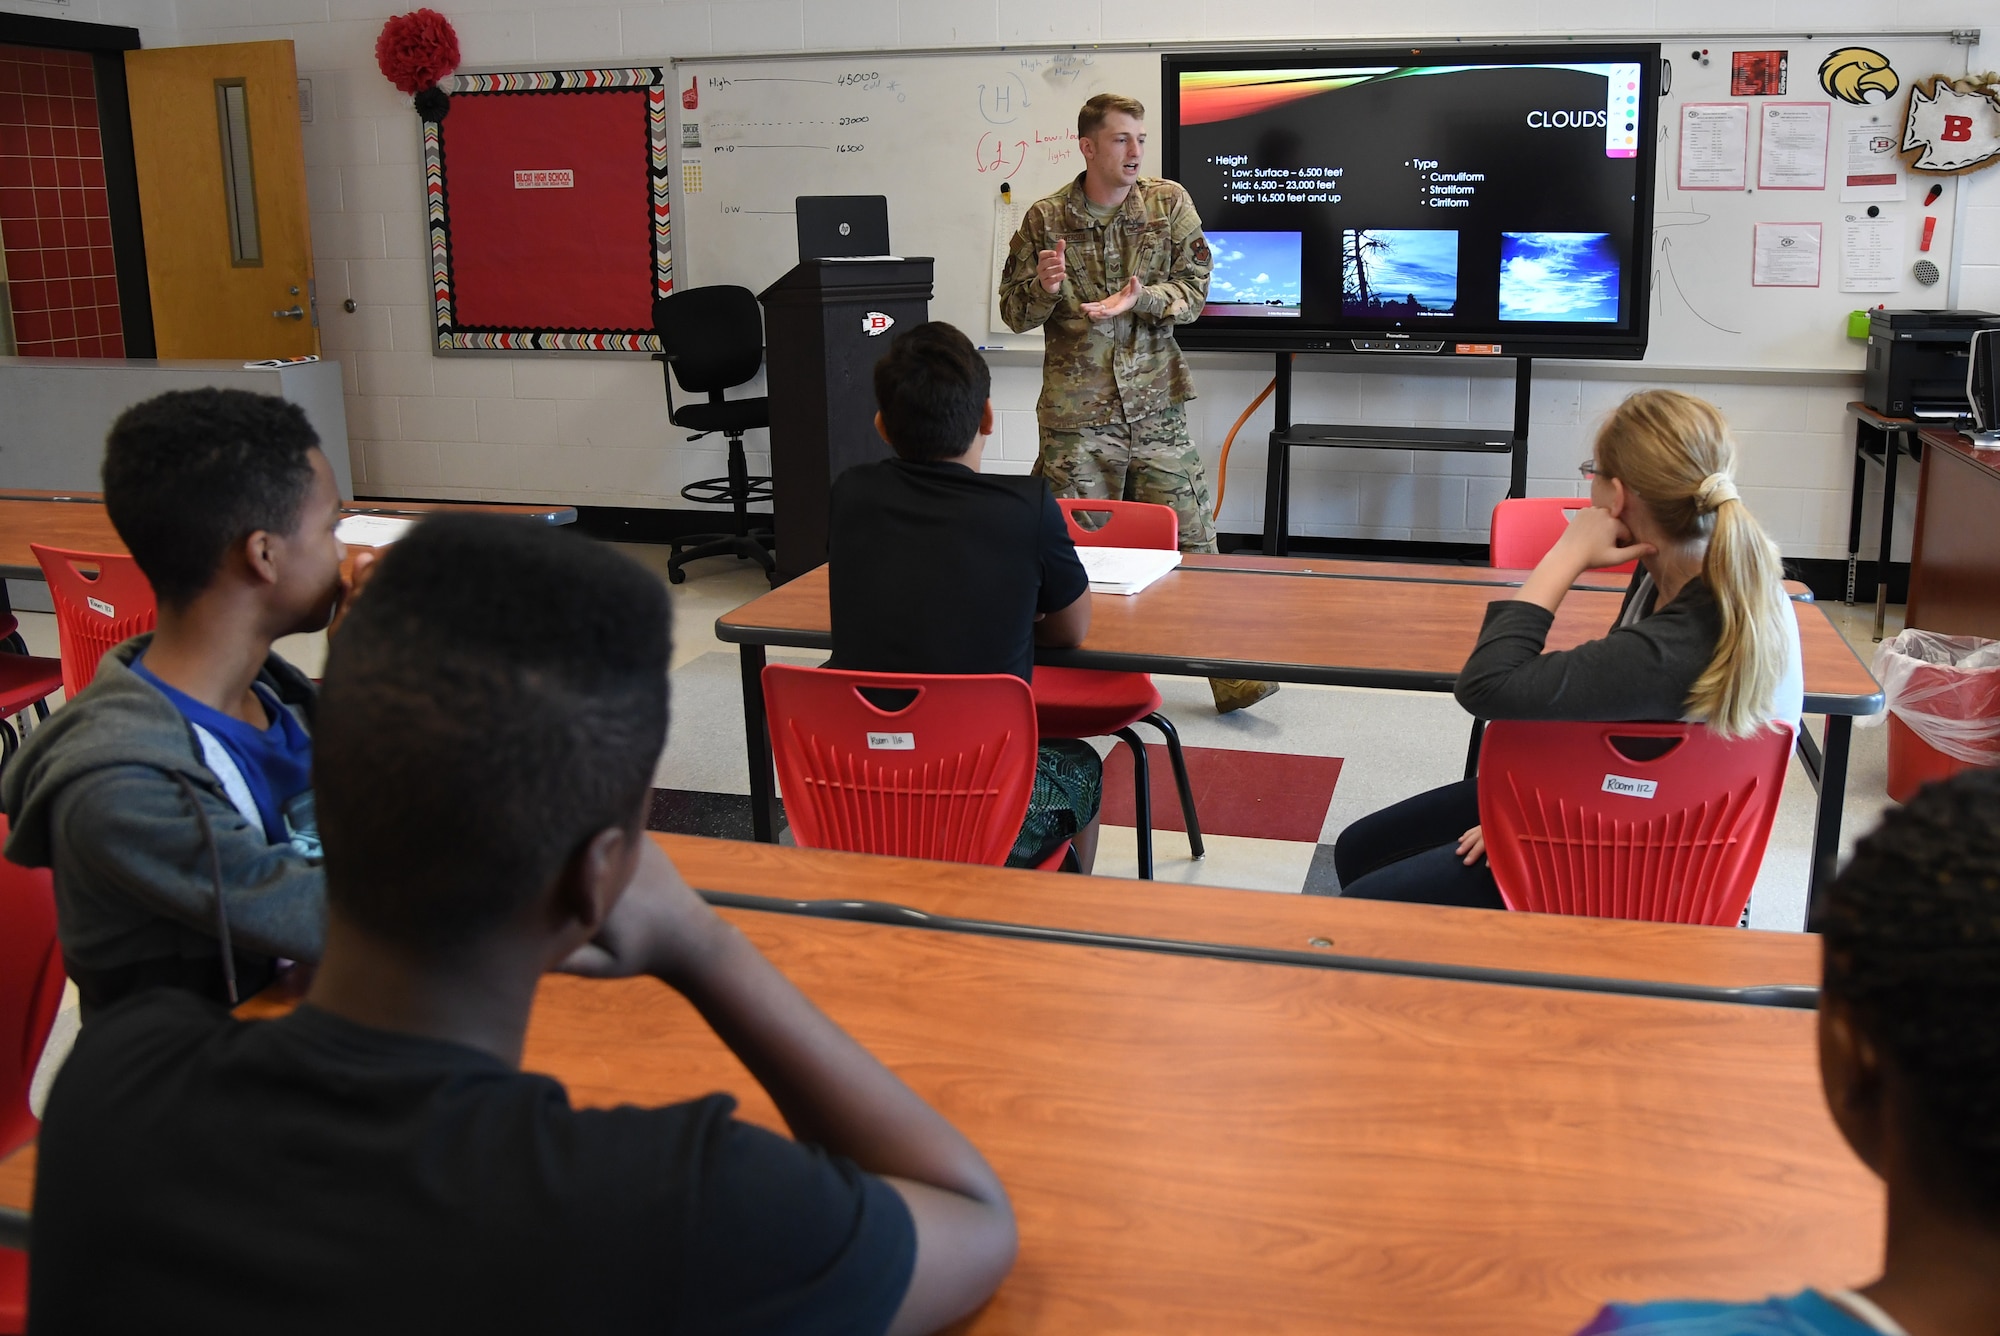 U.S. Air Force Tech. Sgt. Luke Bowersox, 335th Training Squadron army weather forecaster, delivers a weather forecasting brief during the Biloxi Public Schools Science, Technology, Engineering and Mathematics Summer Camp program at Biloxi High School in Biloxi, Mississippi, June 25, 2019. The four-day STEM summer program teaches first through seventh grade students skills for future careers and fosters valuable life skills like problem solving, creativity and collaboration. Keesler personnel volunteered their time to lead instructions on various projects. (U.S. Air Force photo by Kemberly Groue)